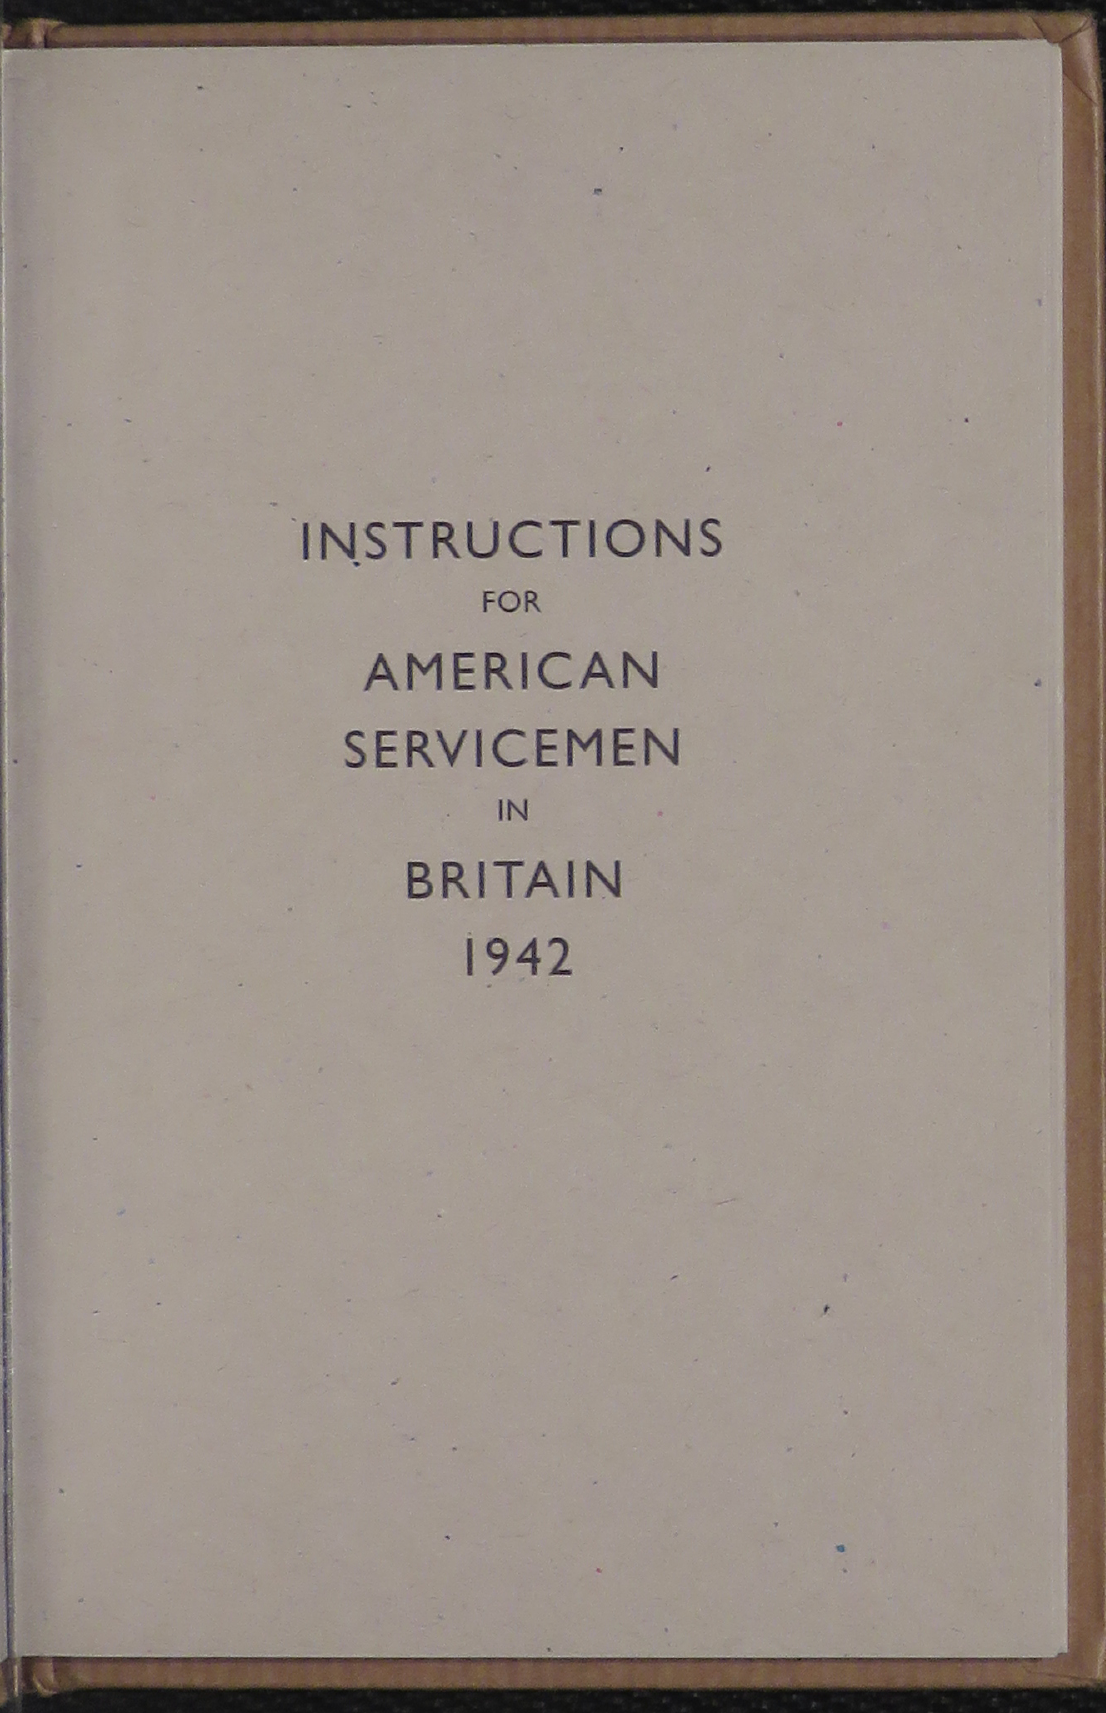 Sample page 5 from AirCorps Library document: Instructions for American Servicemen in Britain